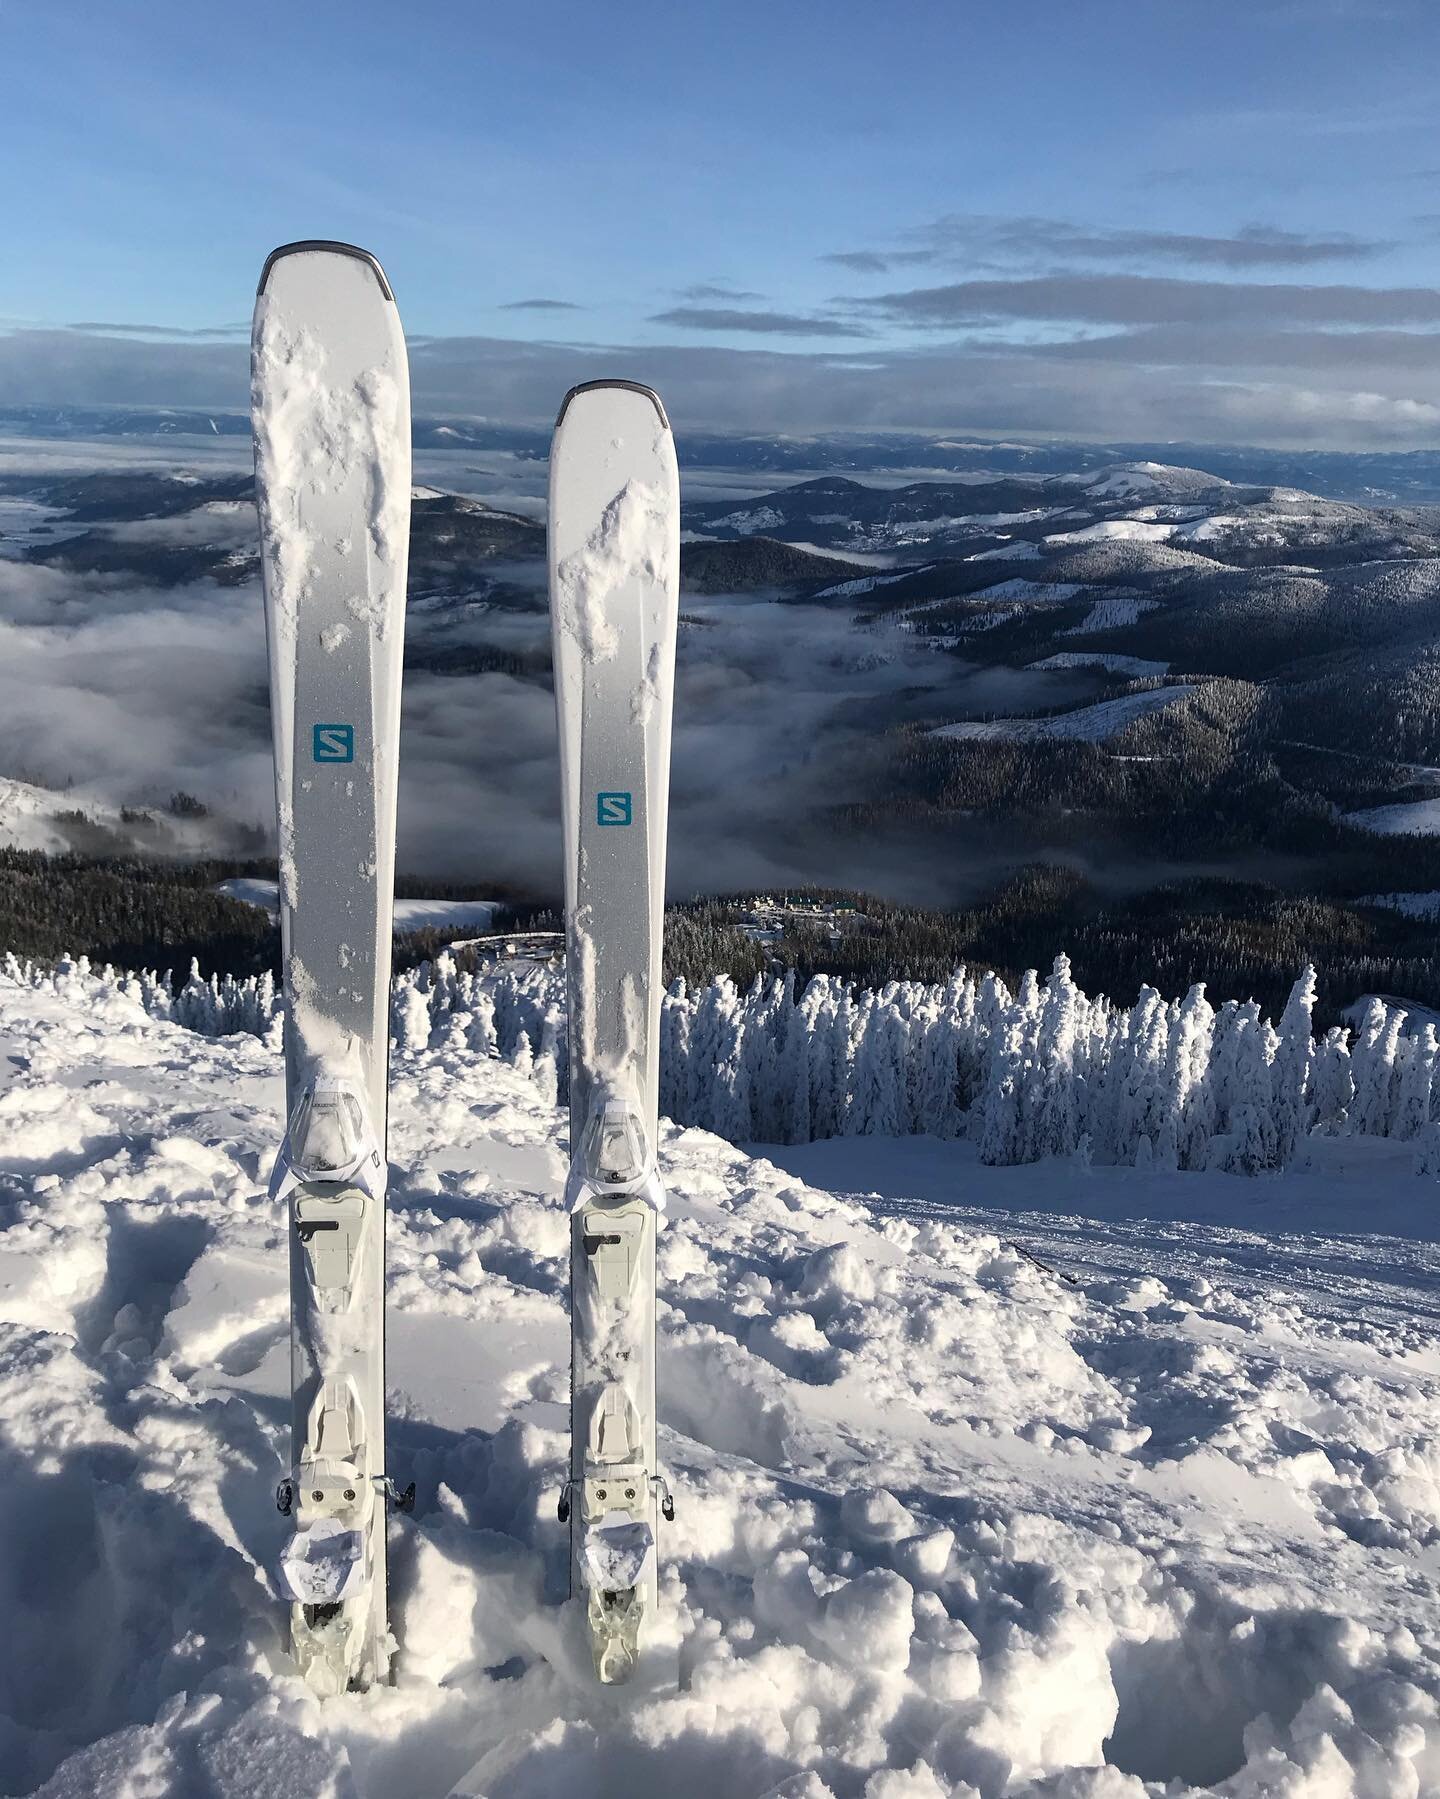 Absolutely no tweaking to this photo, it was just that perfect of a day on top of Mt. Spokane. 💕
Also, I know function is the most important thing (and these skis are working great for me), but I can&rsquo;t get over how slick they look too! 😅⛷